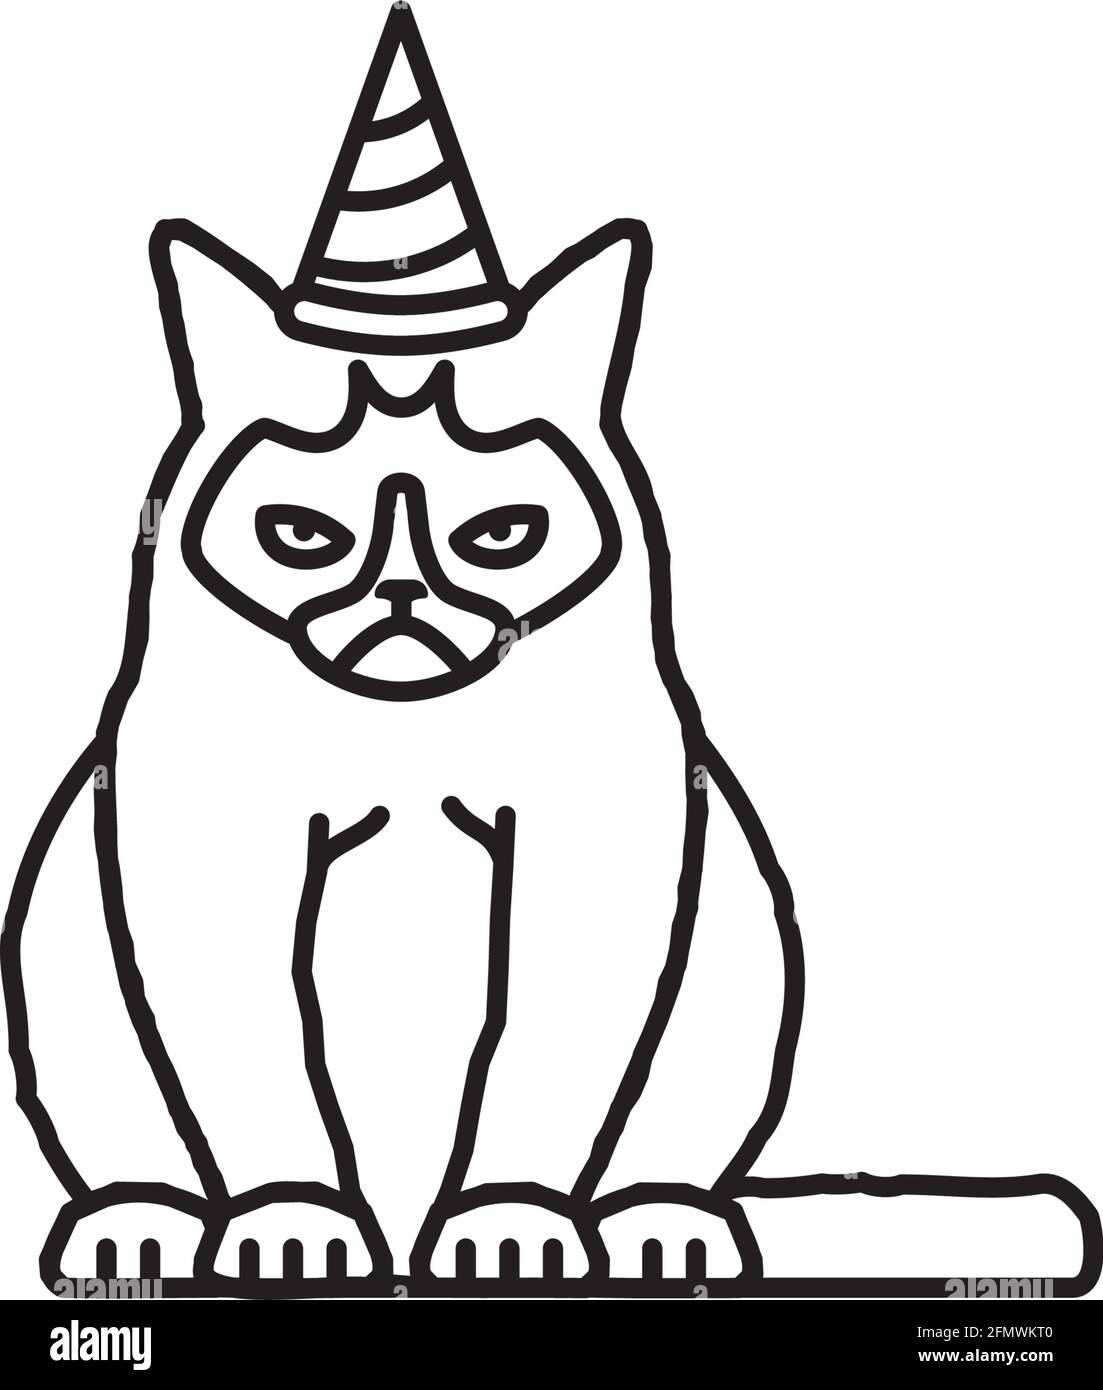 Bored grumpy cat with party hat vector line icon for Blasé Day on November 25 Stock Vector